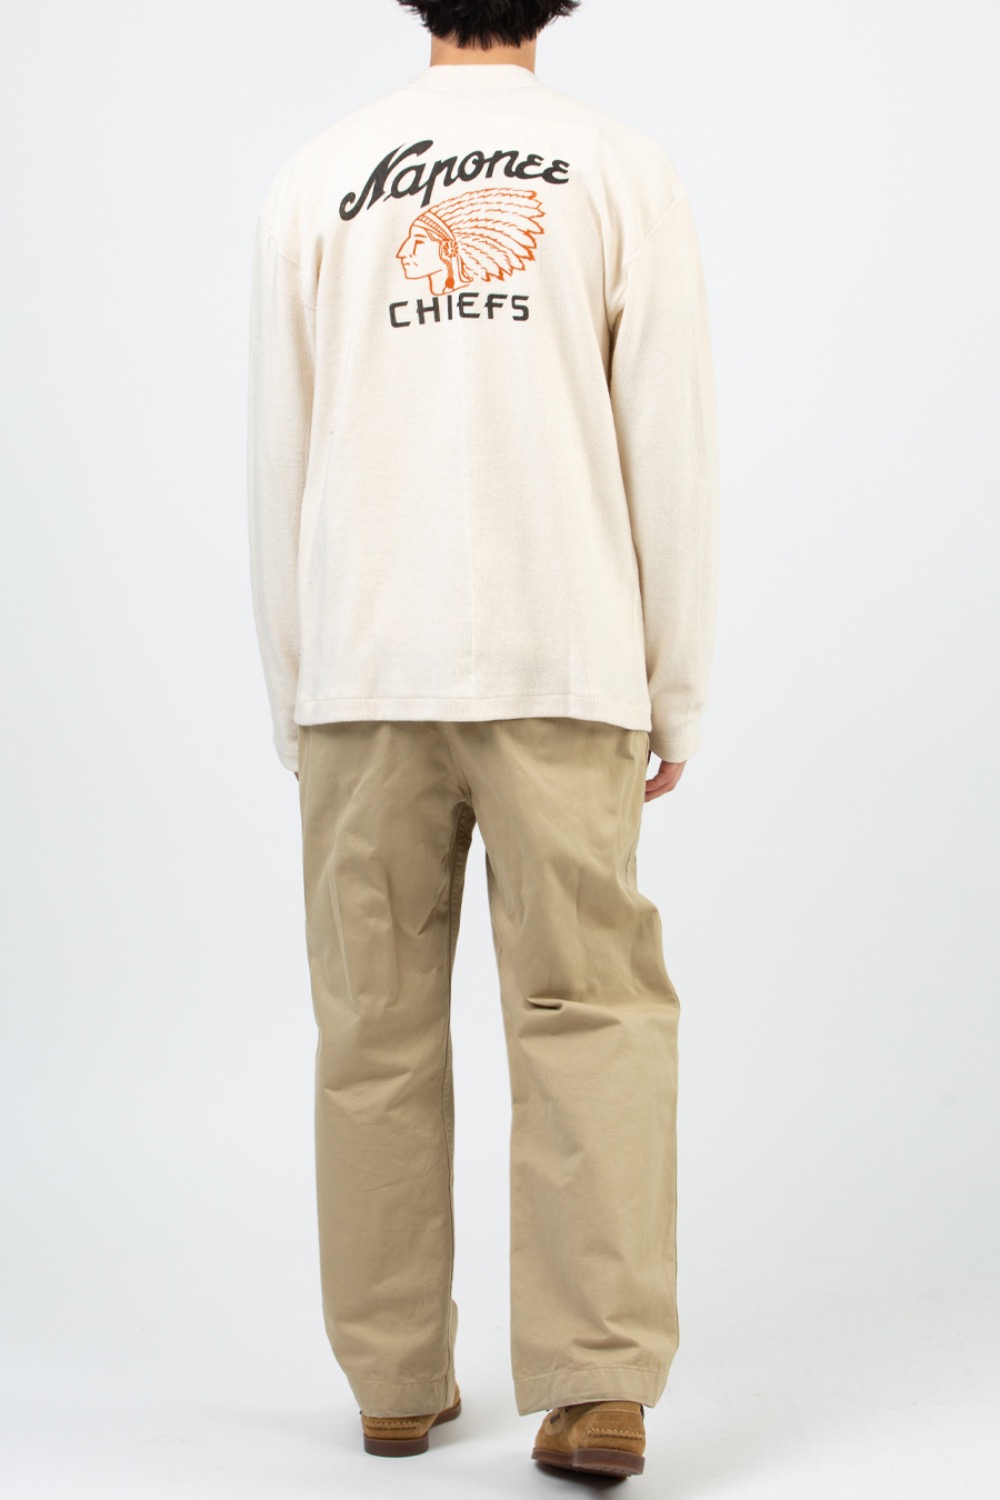 LOT 488 CHIEFS OFFWHITE